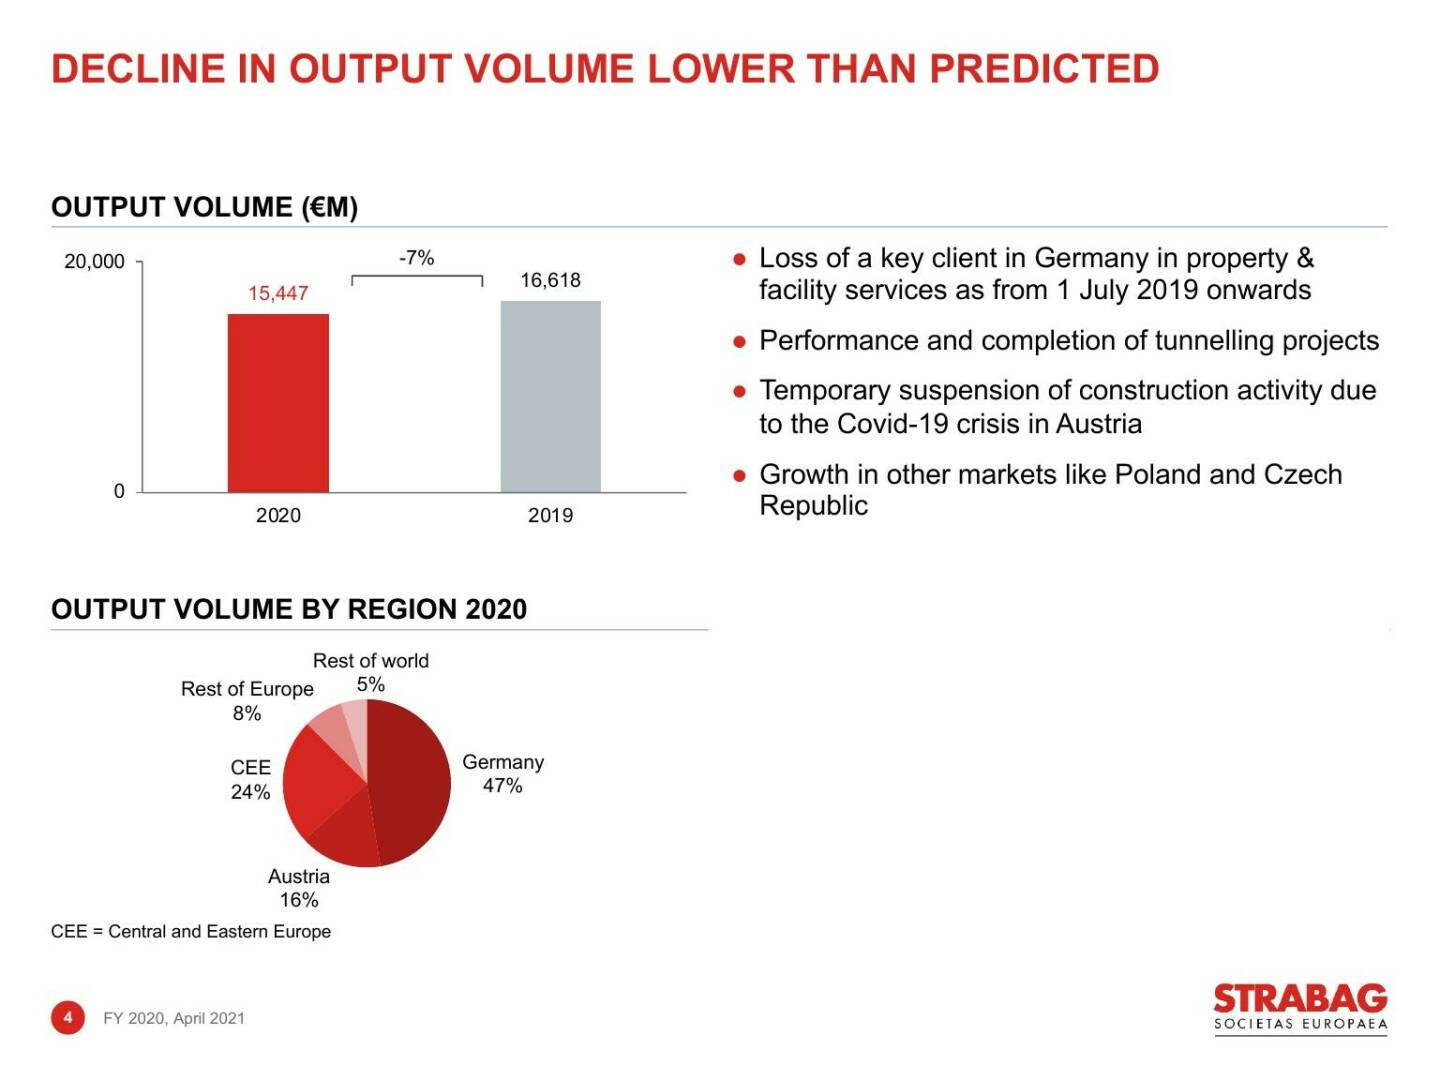 Strabag - Decline in output volume lower than predicted